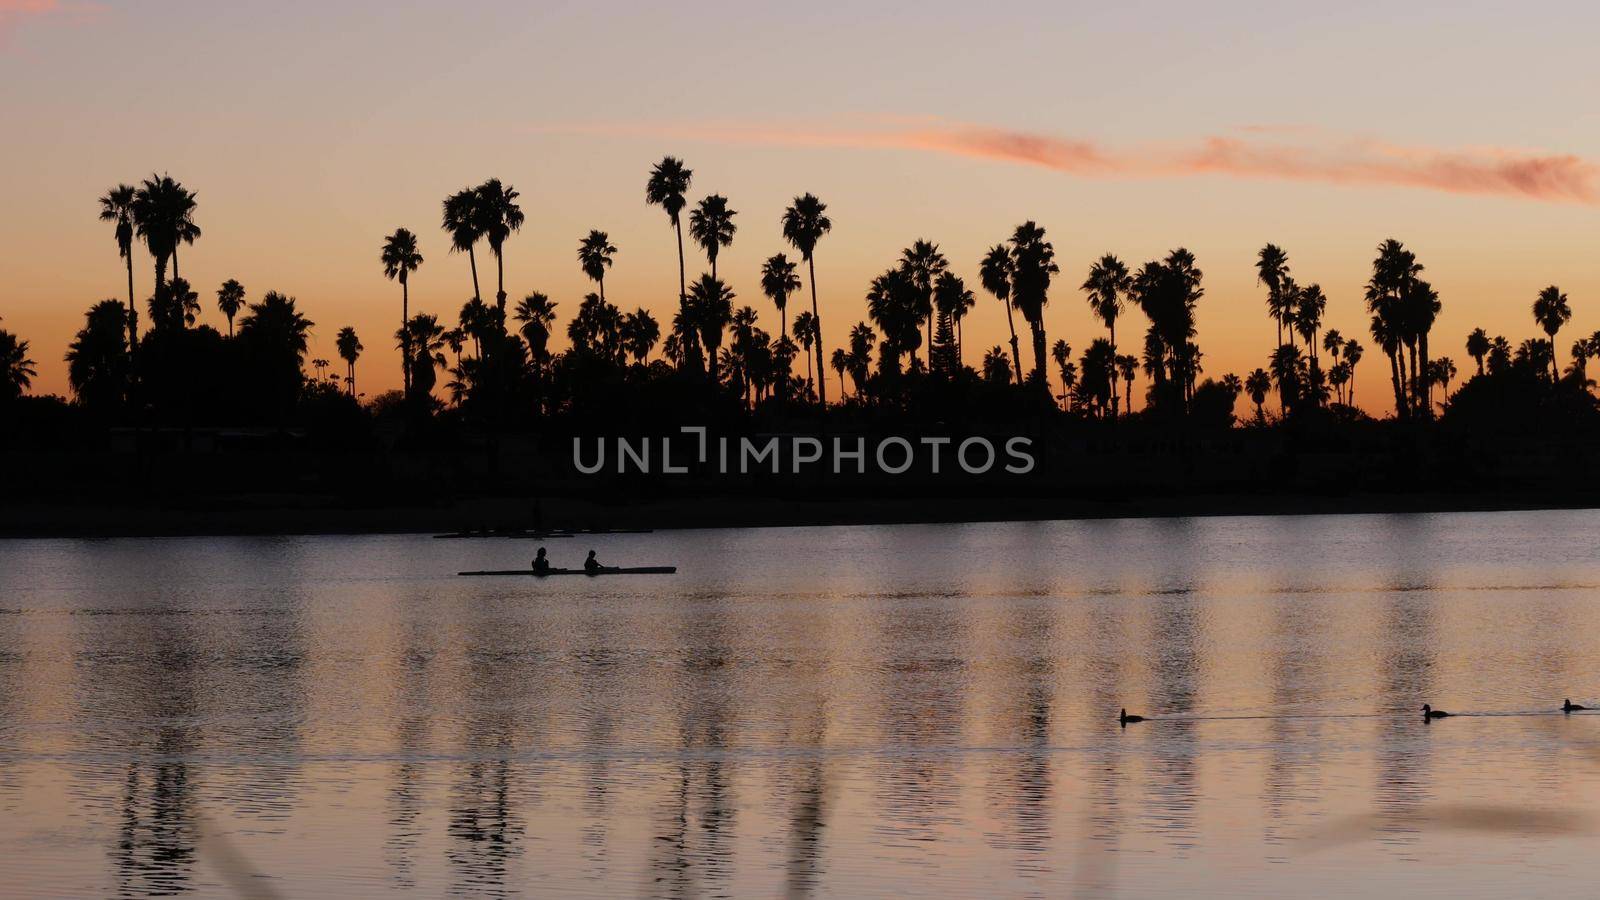 Palm trees silhouettes on sunset ocean beach, California coast, USA. Reflection of purple pink orange sky in calm water of Mission Bay Park, San Diego. People kayaking, paddling, rowing or canoeing.